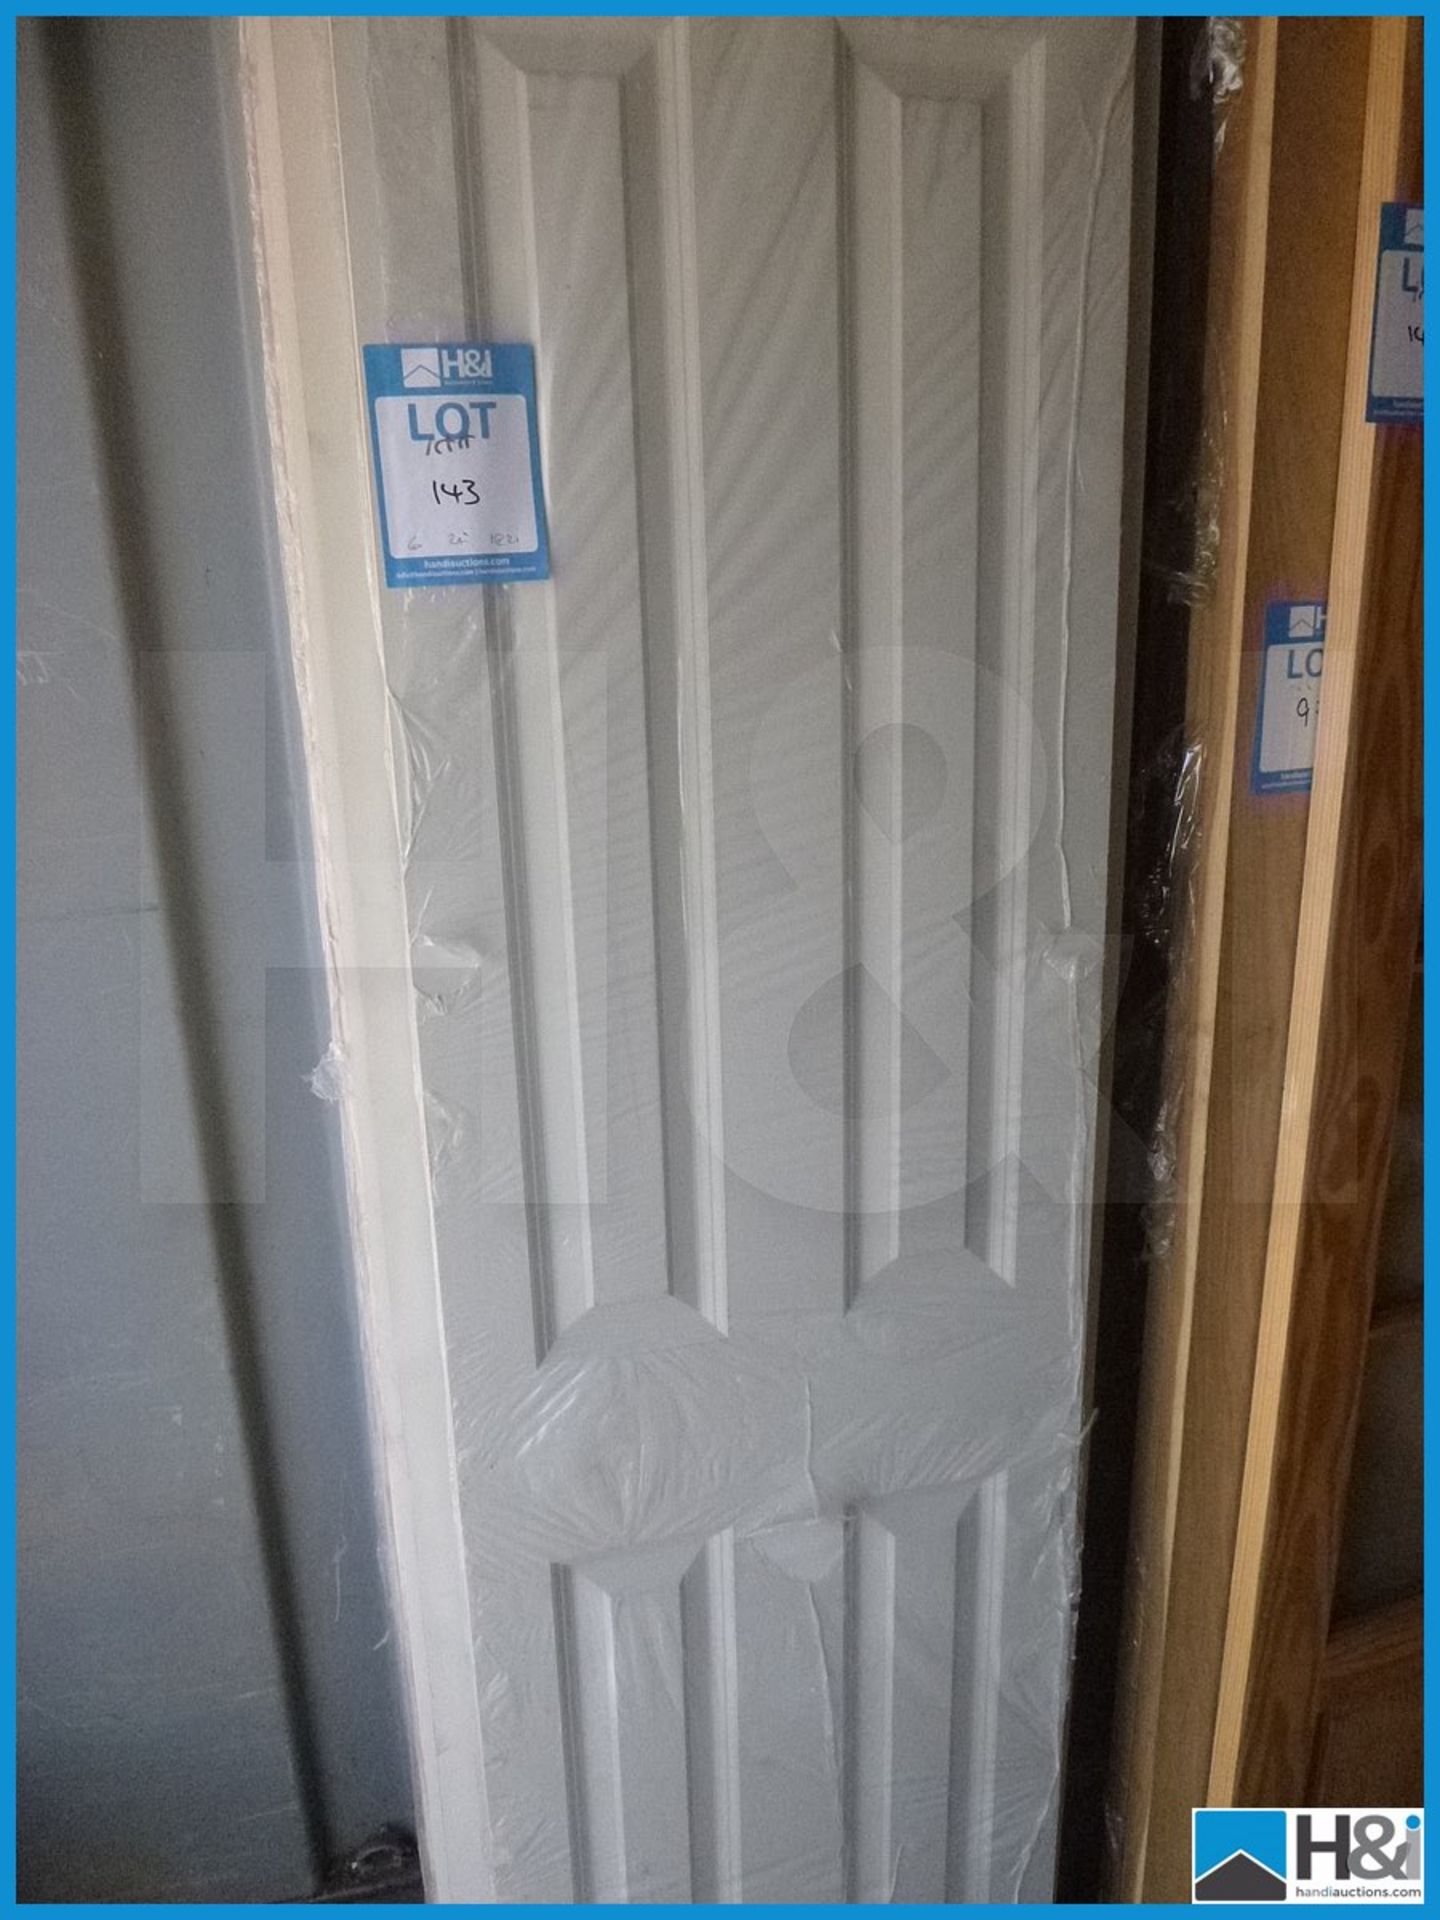 6 Off - White 4 Panel Doors, 78X24 78X21 Appraisal: Viewing Essential Serial No: NA Location: H&I